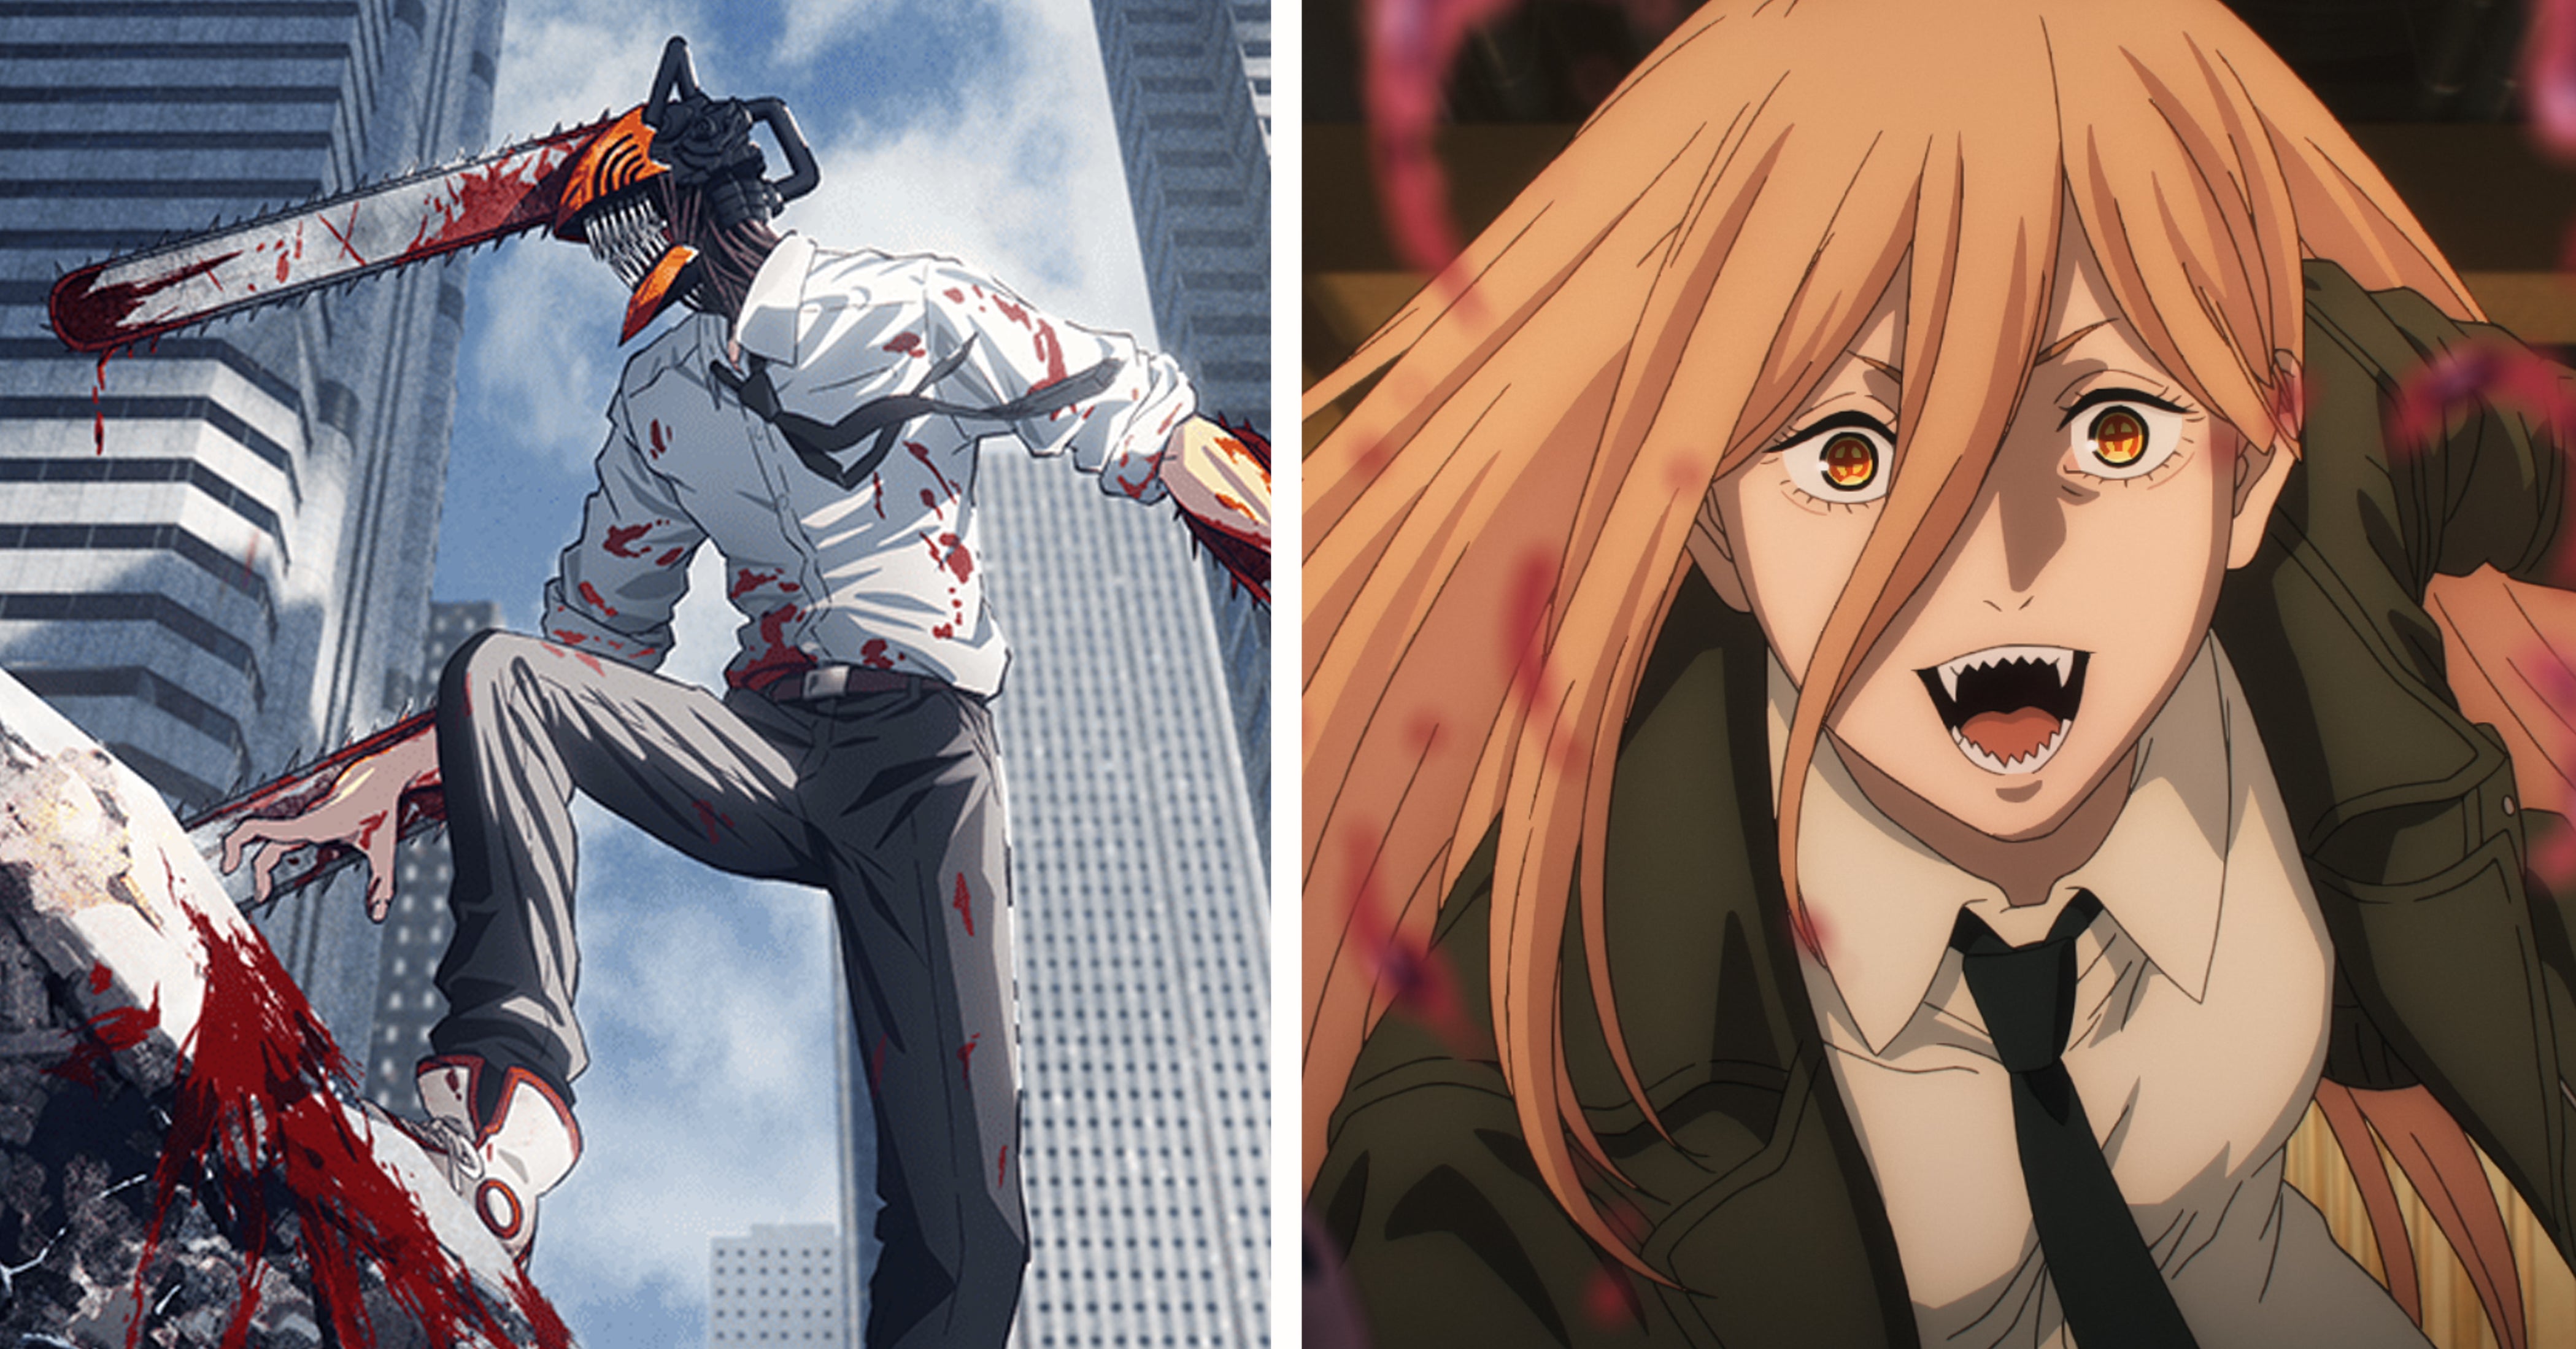 Here’s Why Everyone Can’t Stop Talking About The Anime Adaptation Of “Chainsaw Man”